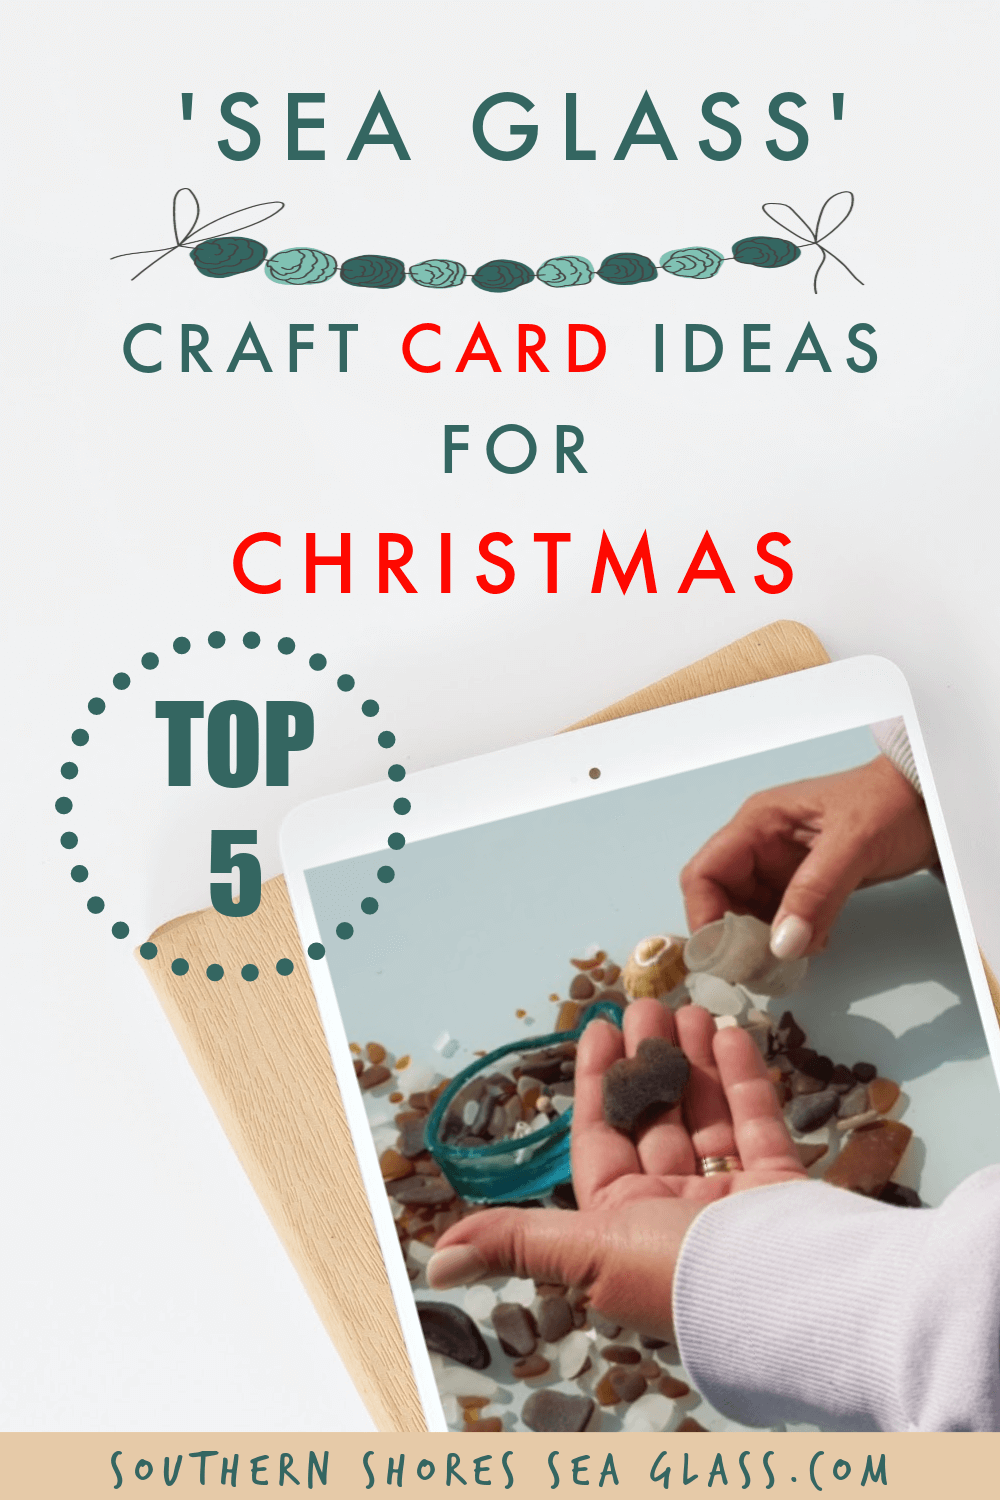 Top 5 Craft Card Ideas for Christmas created using your very own, personally collected Sea Glass for that extra special loving touch 